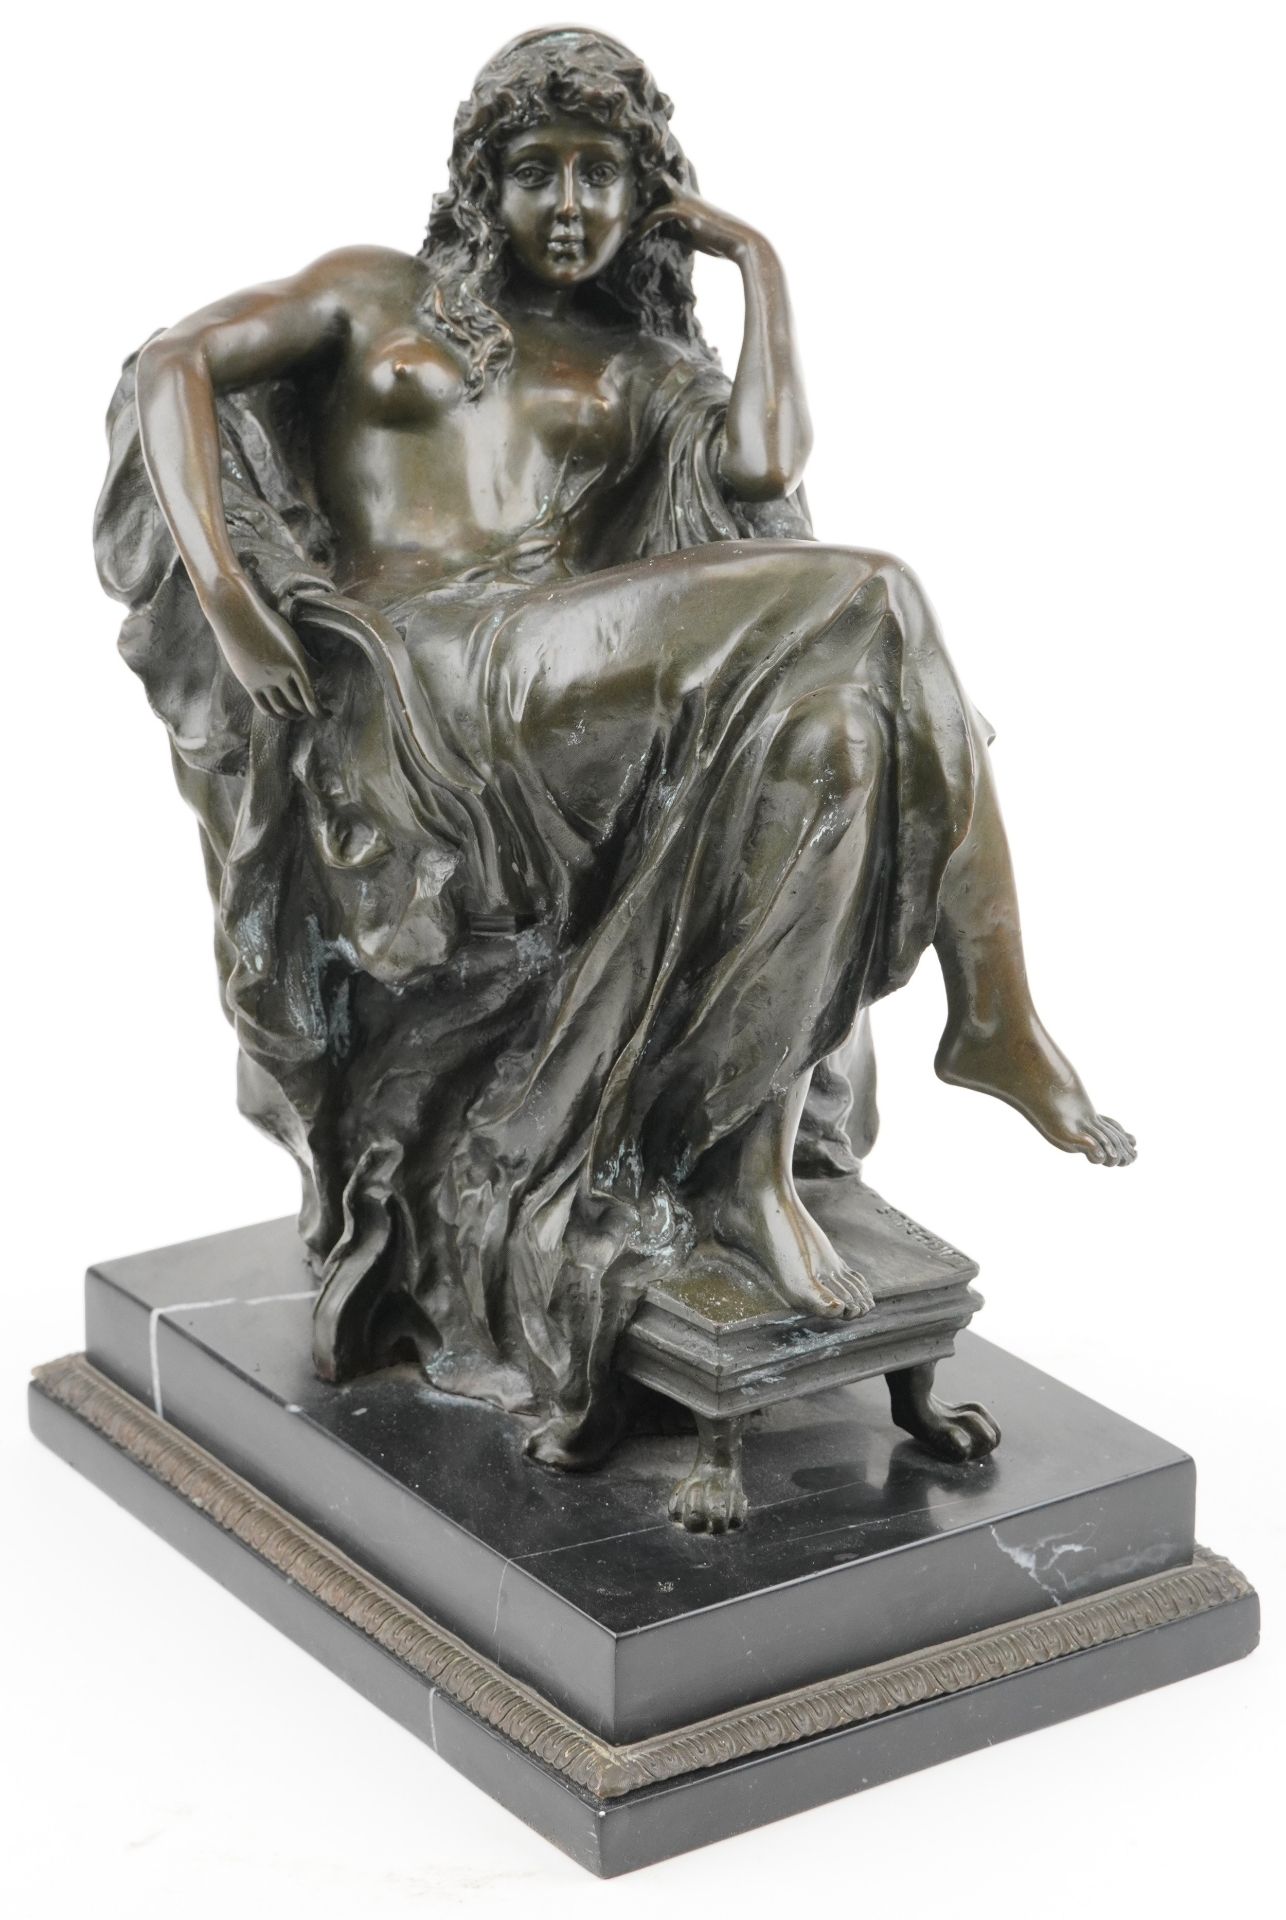 After Carpeaus, large patinated bronze statue of a semi nude Art Nouveau female raised on a